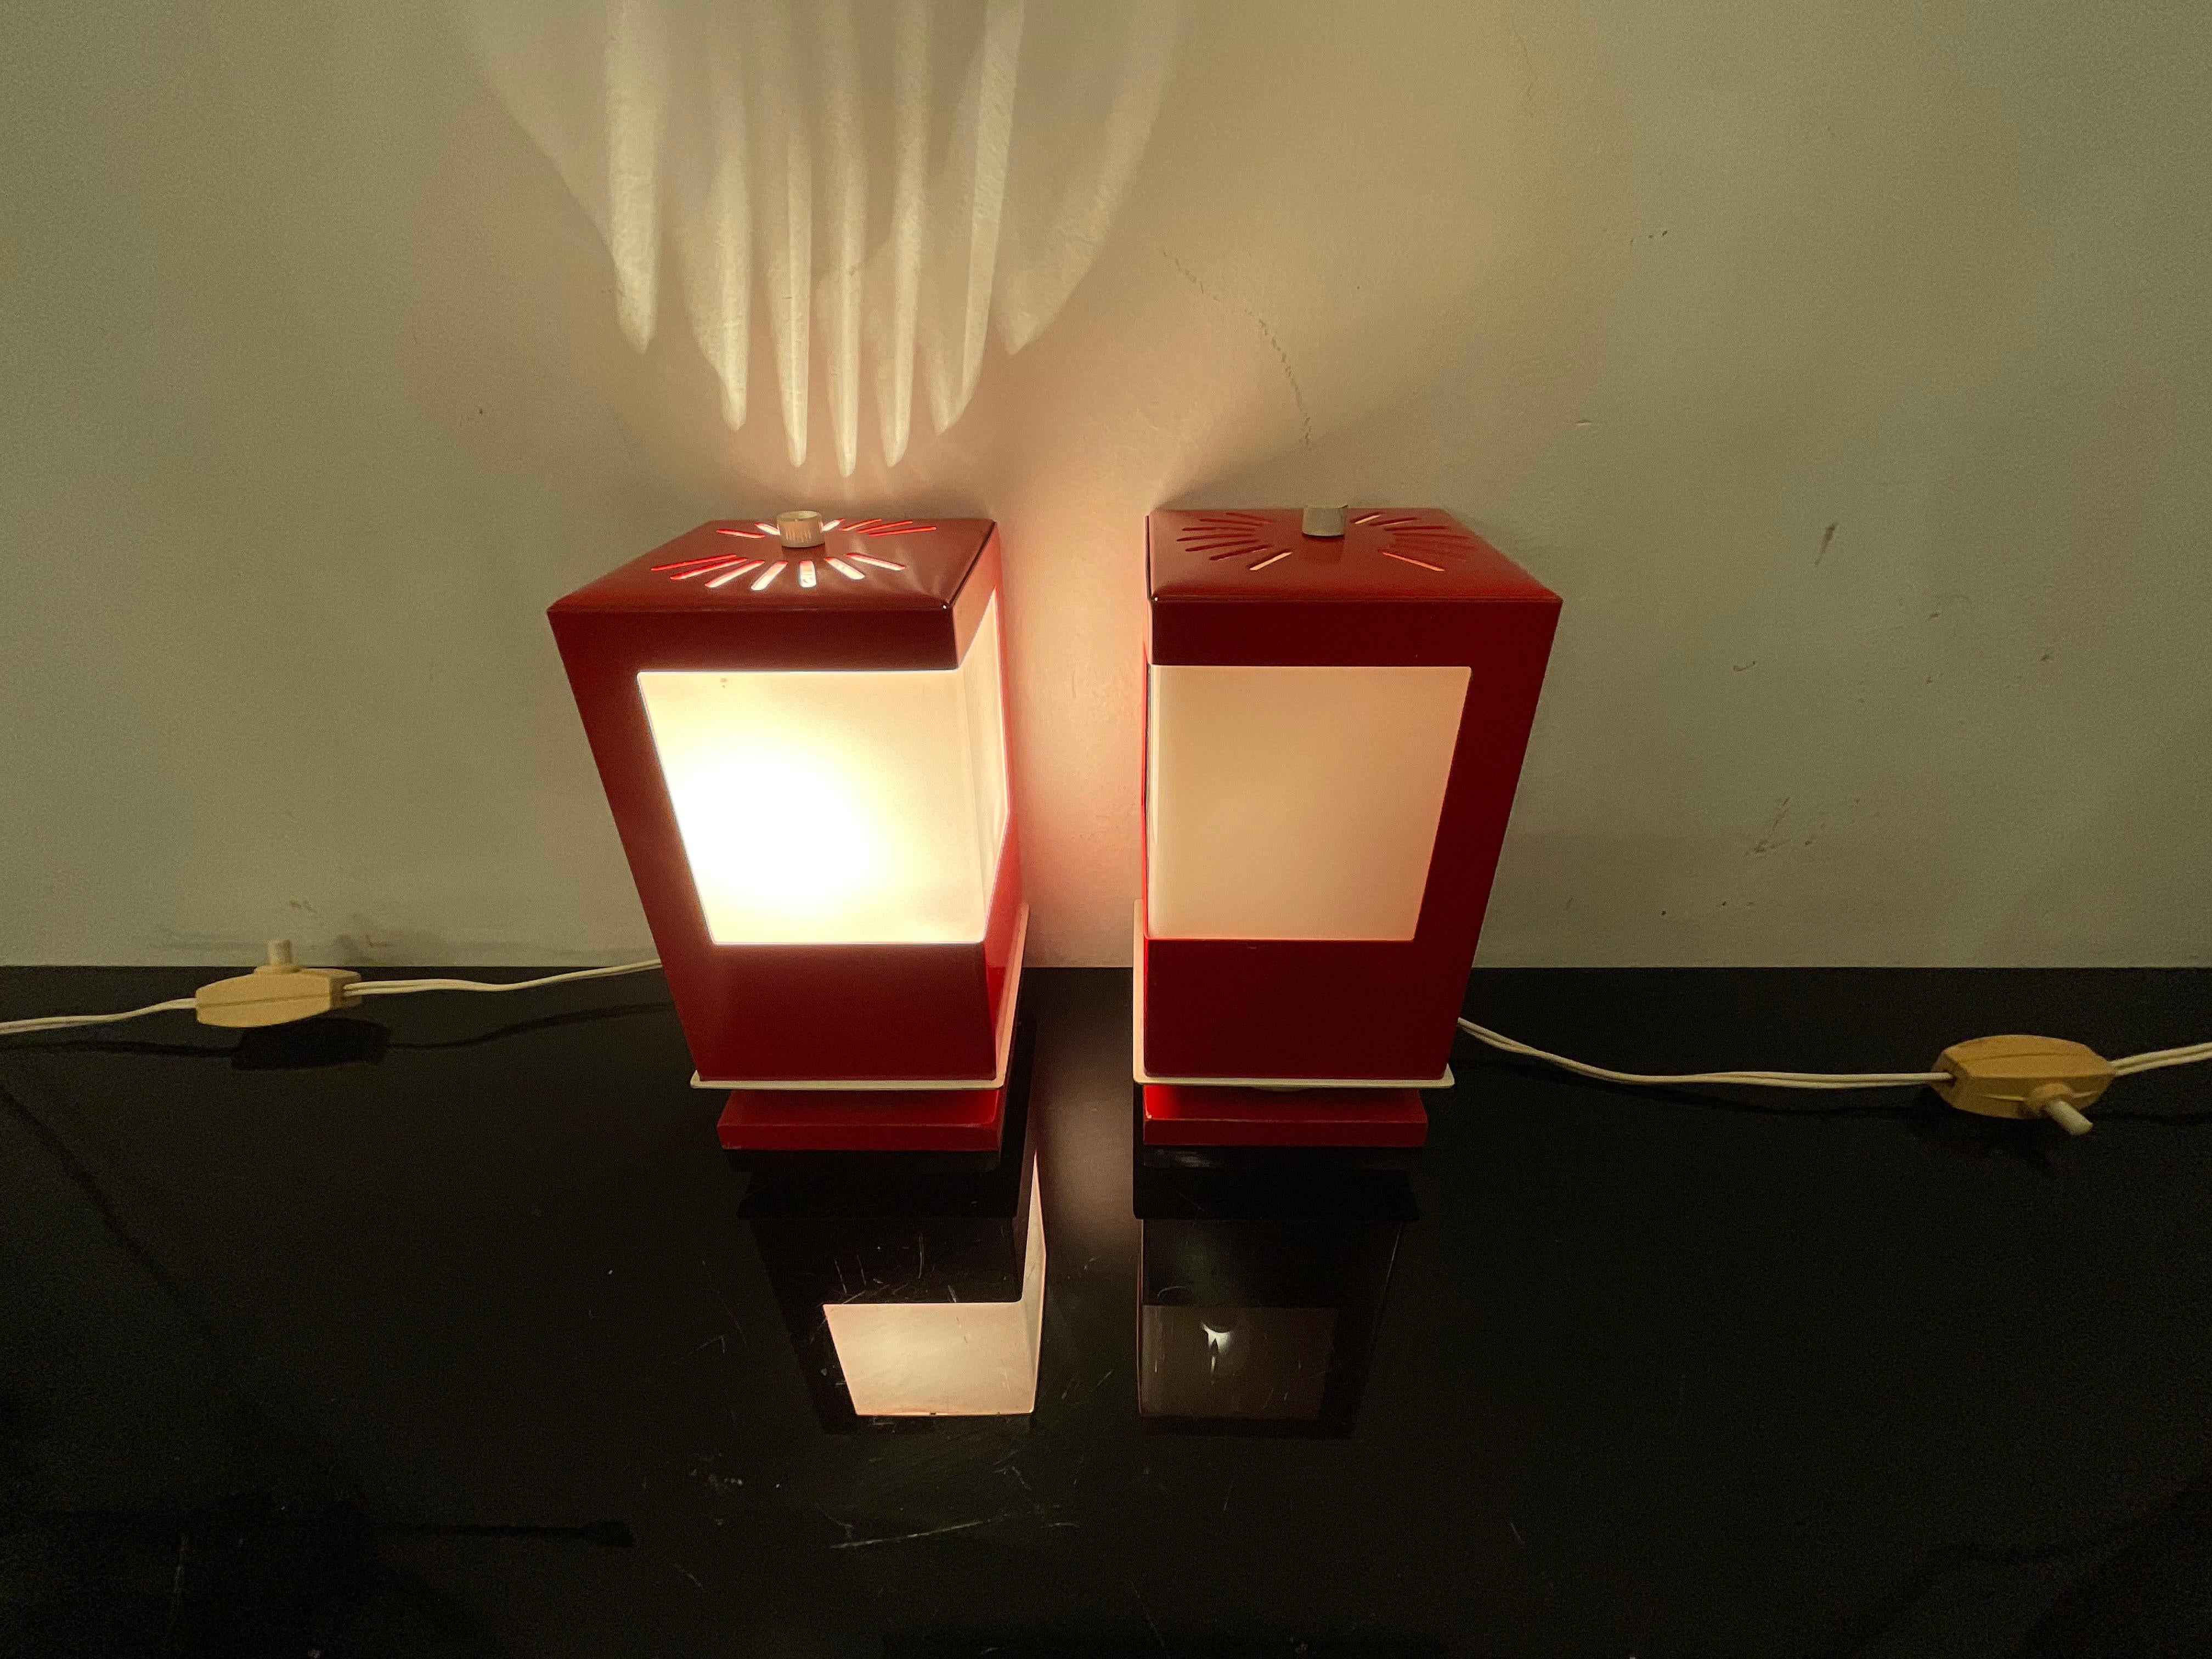 Pair of lamps made of red enameled metal and white plexiglass.
Perfect condition with its original color from the 1970s.